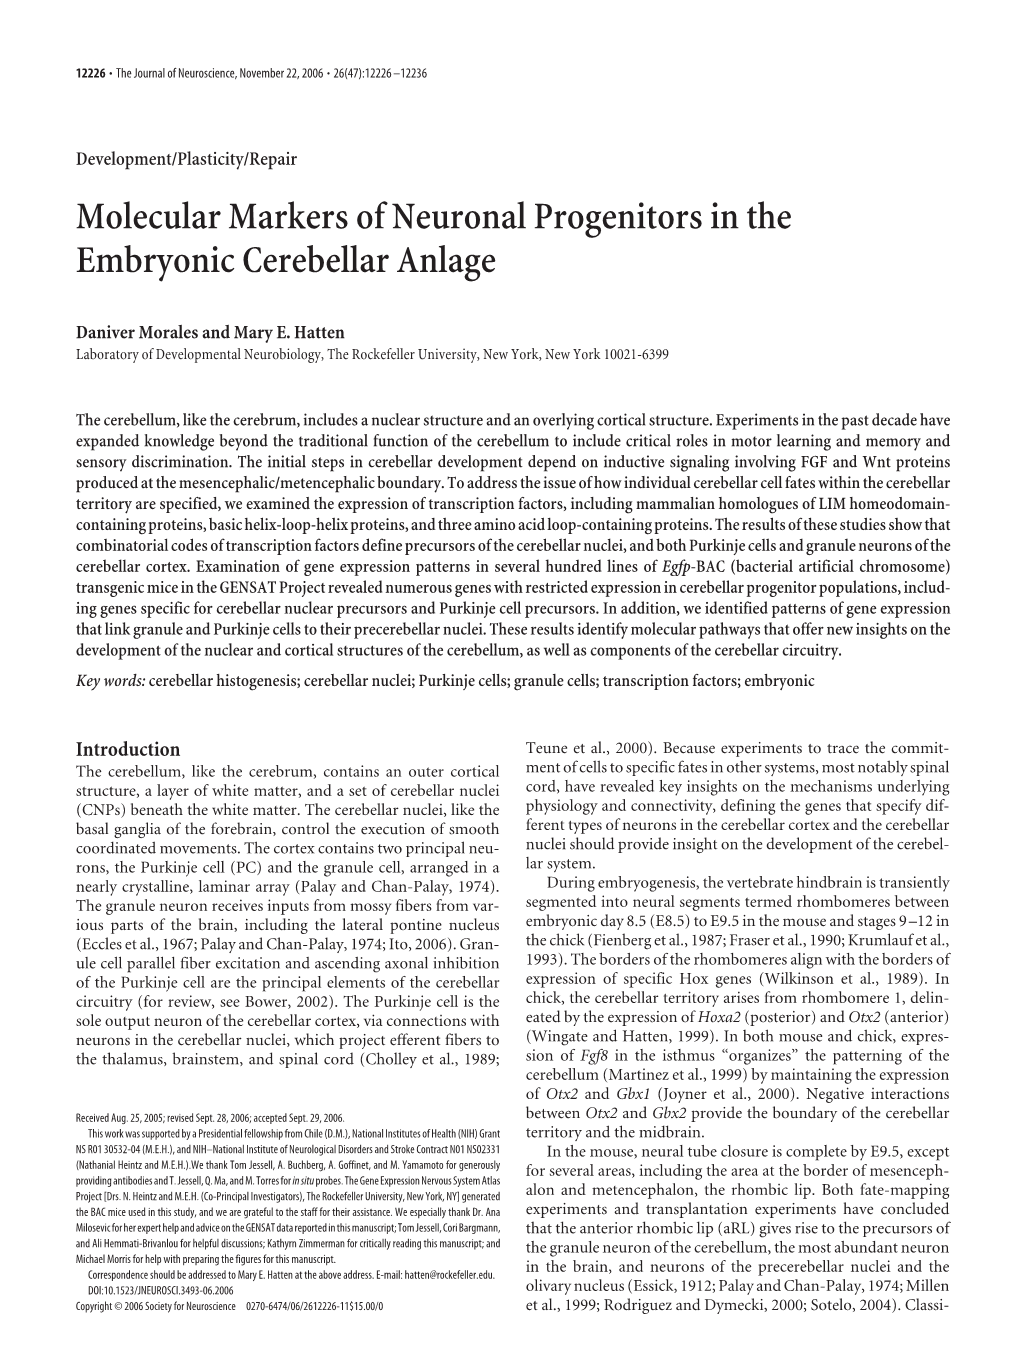 Molecular Markers of Neuronal Progenitors in the Embryonic Cerebellar Anlage